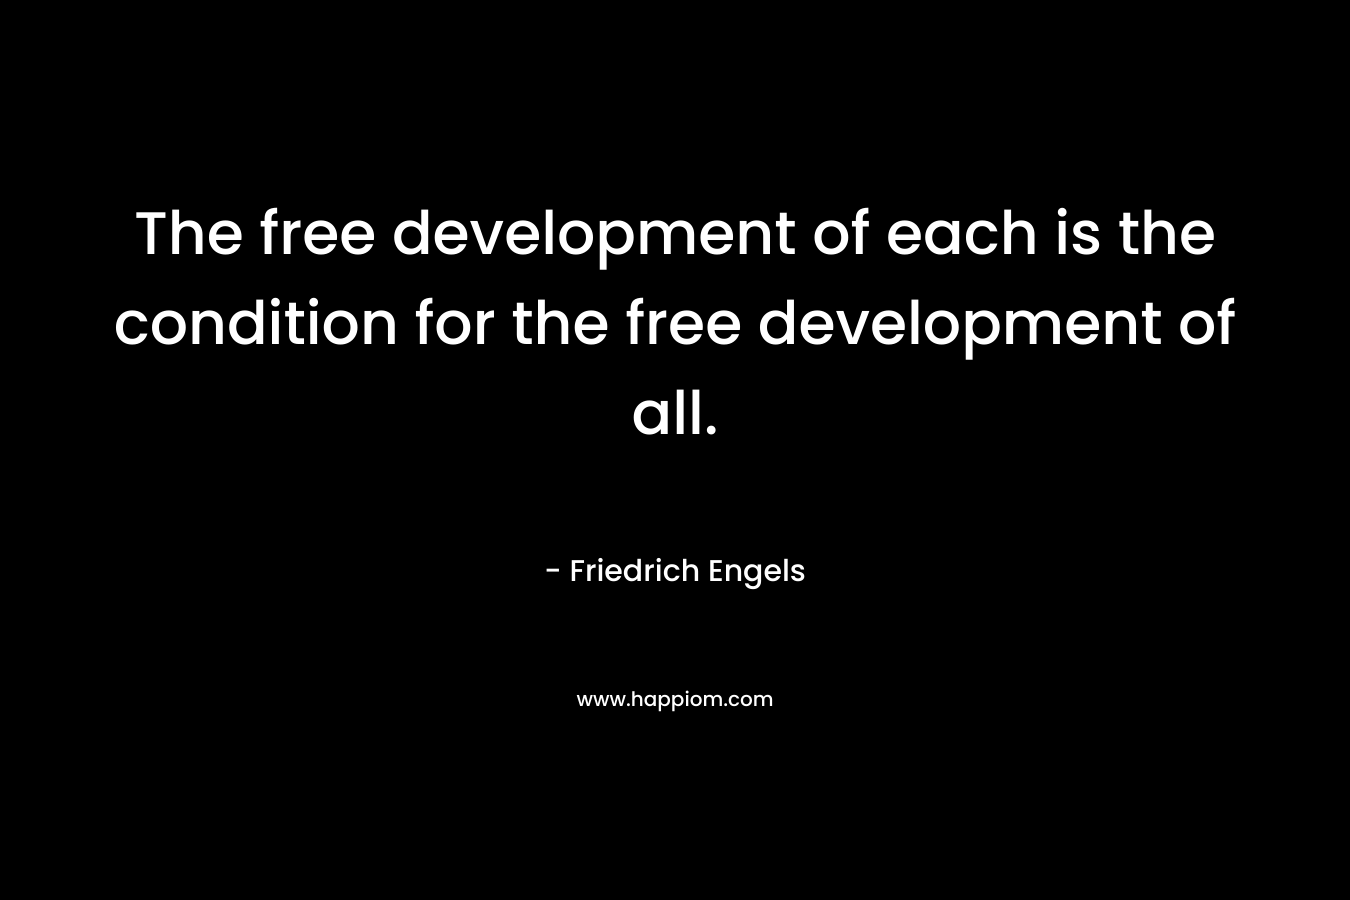 The free development of each is the condition for the free development of all.